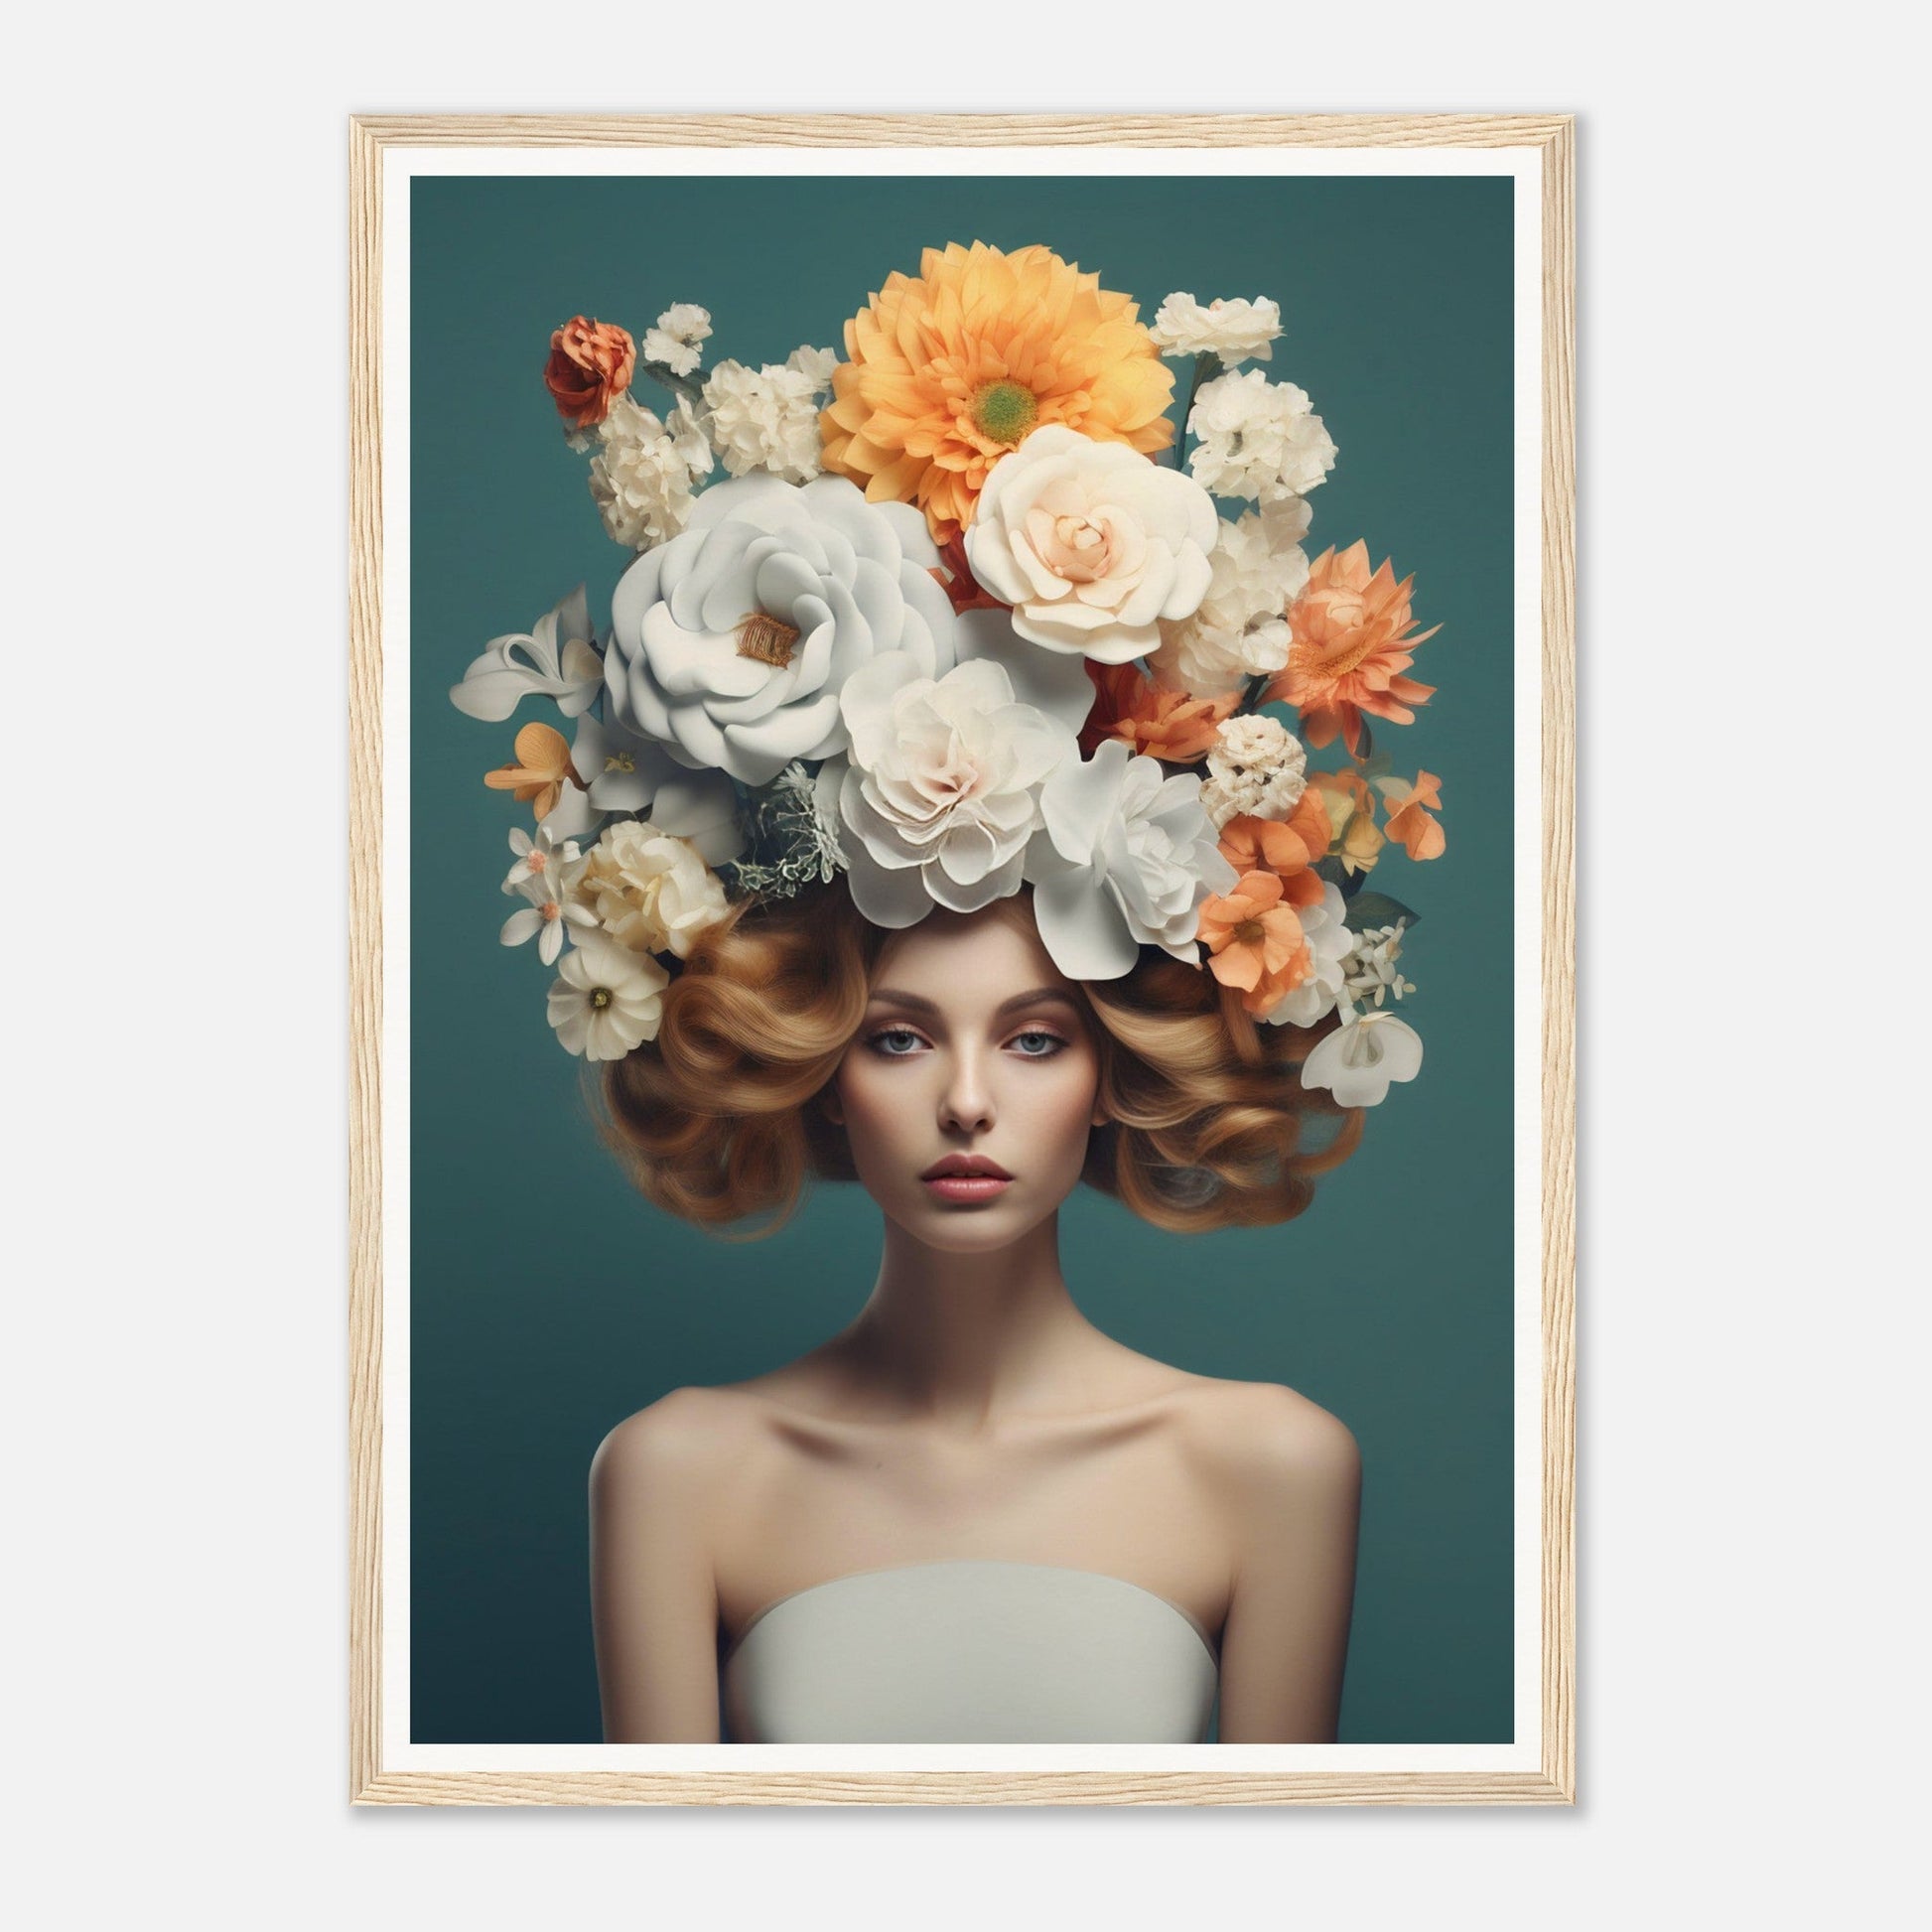 A Flower Head #12 The Oracle Windows™ Collection wall art depicting a woman adorned with flowers on her head, perfect for transforming your space.